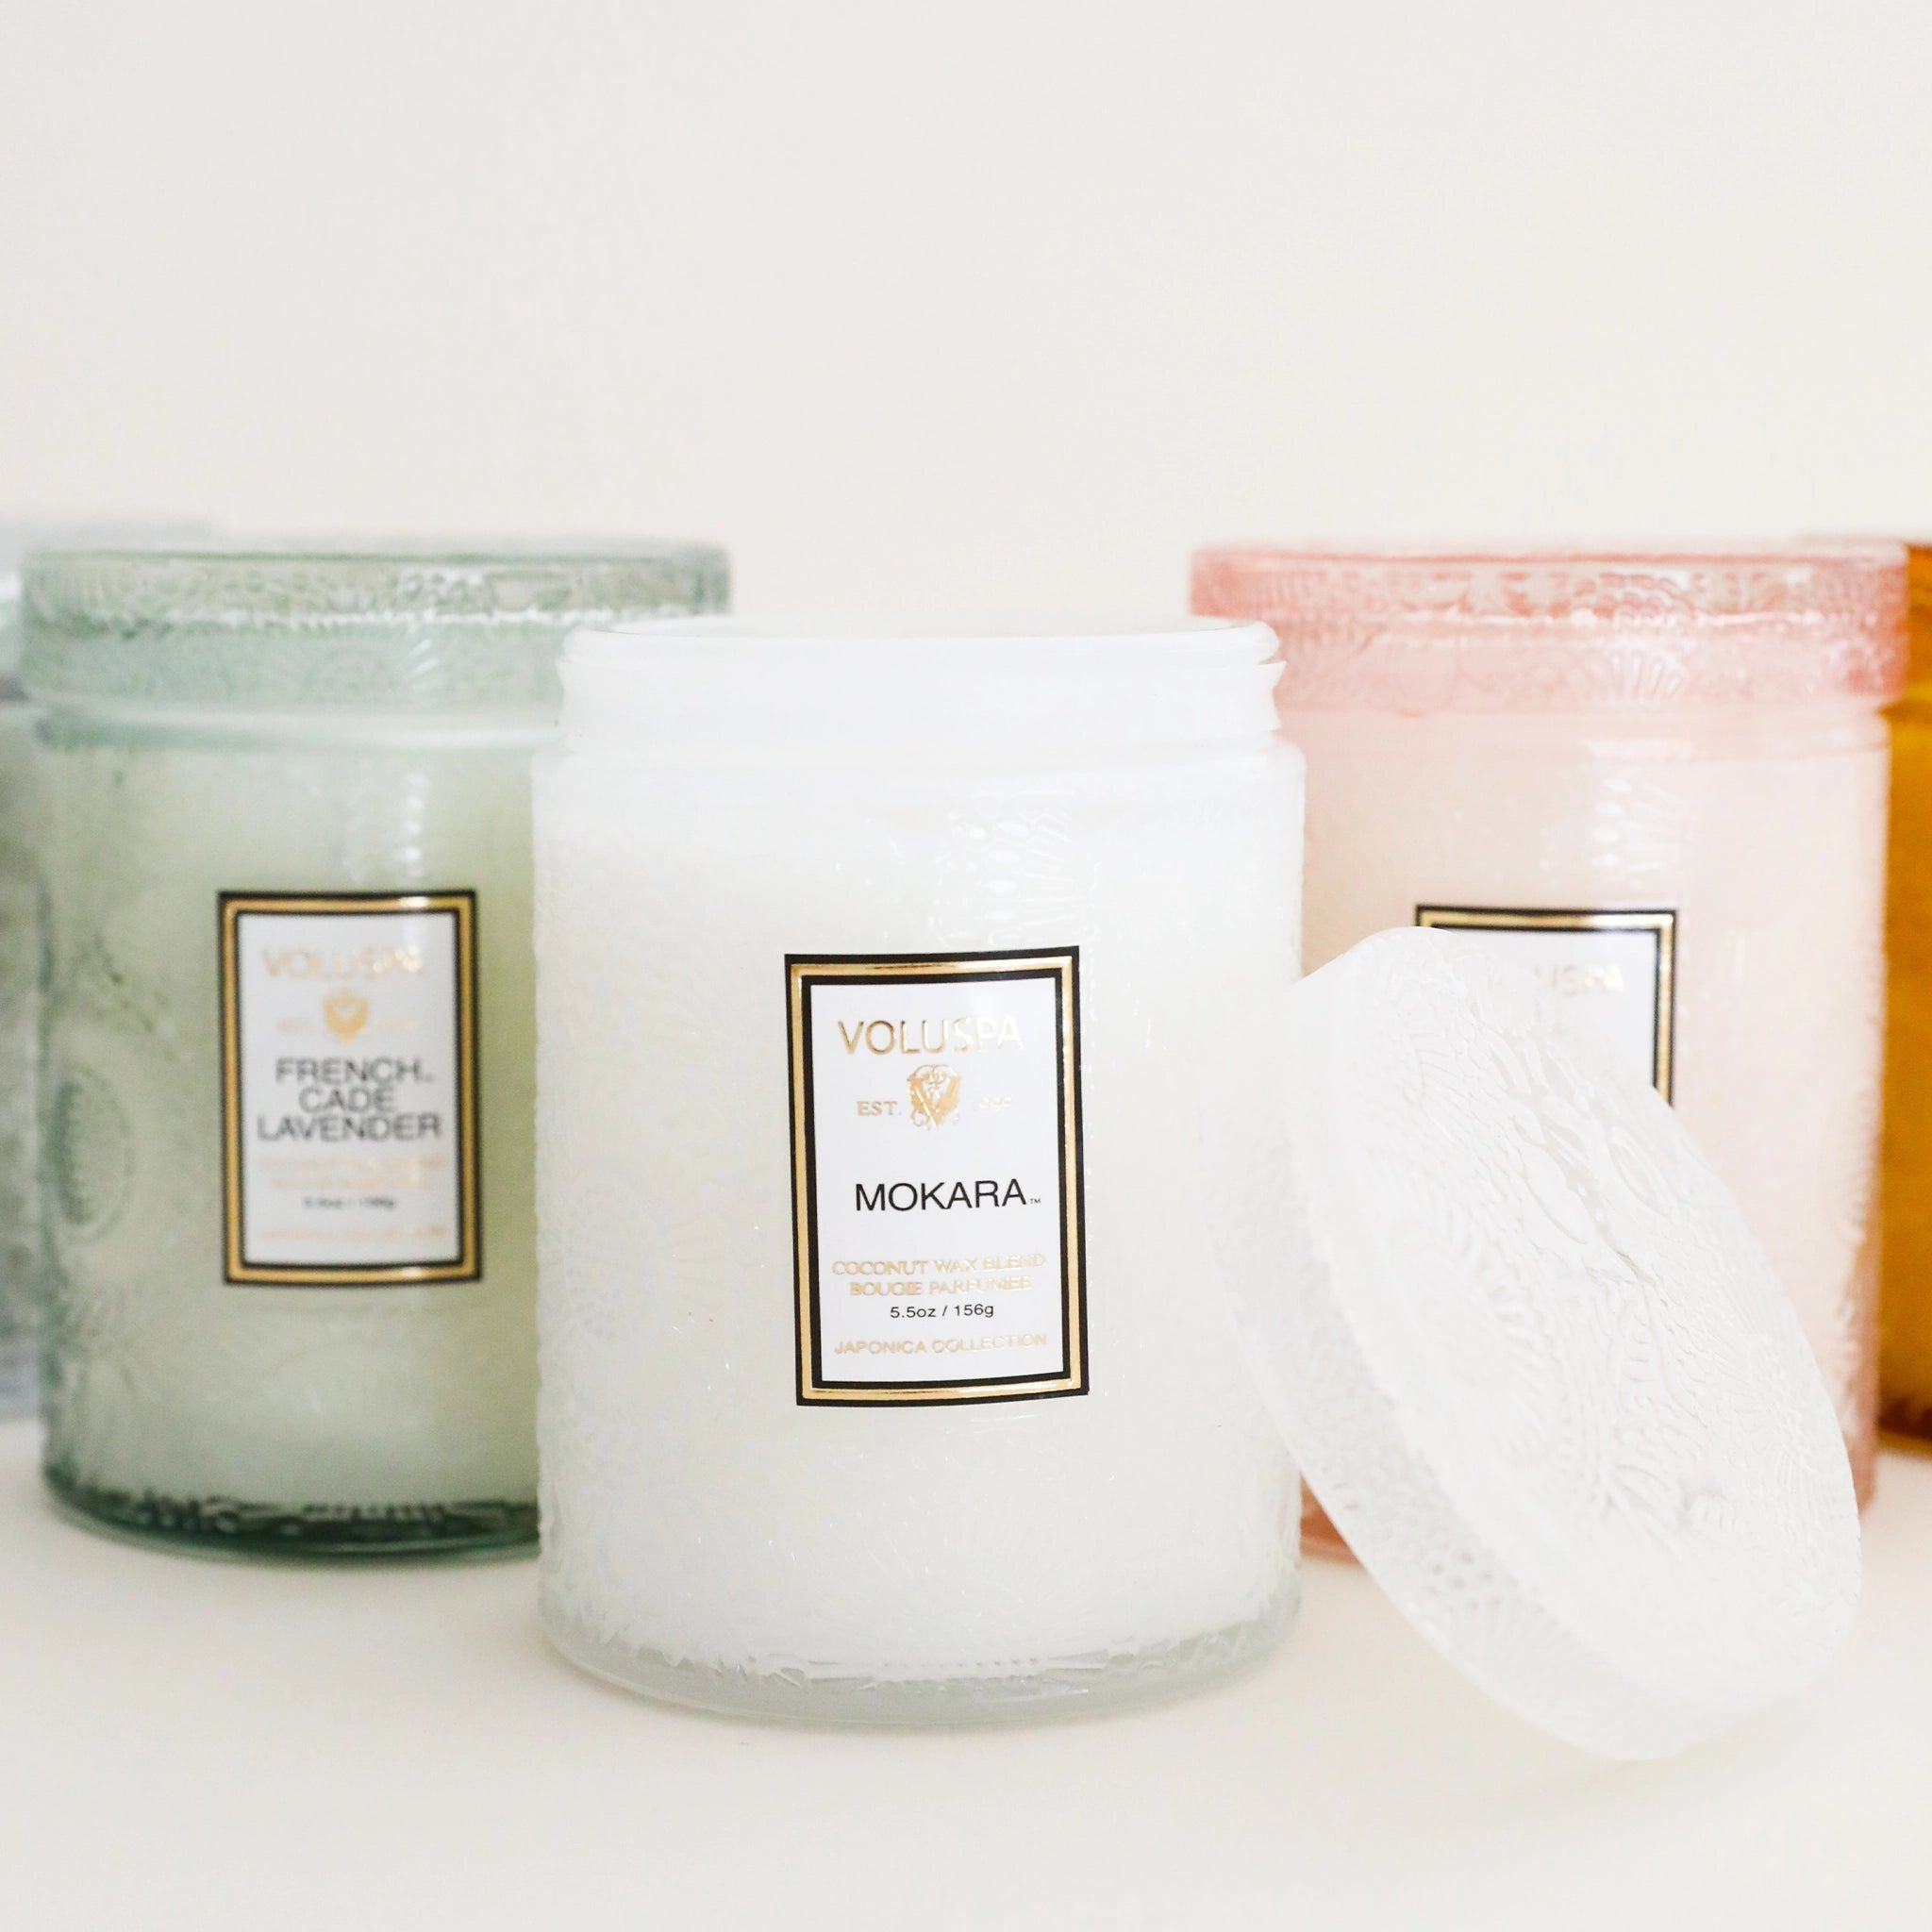 A decorative glass jar candle in a white color with a rectangular label on the front that reads, "Voluspa Mokara" alongside other scents of the same brand candle that feature different color ways.